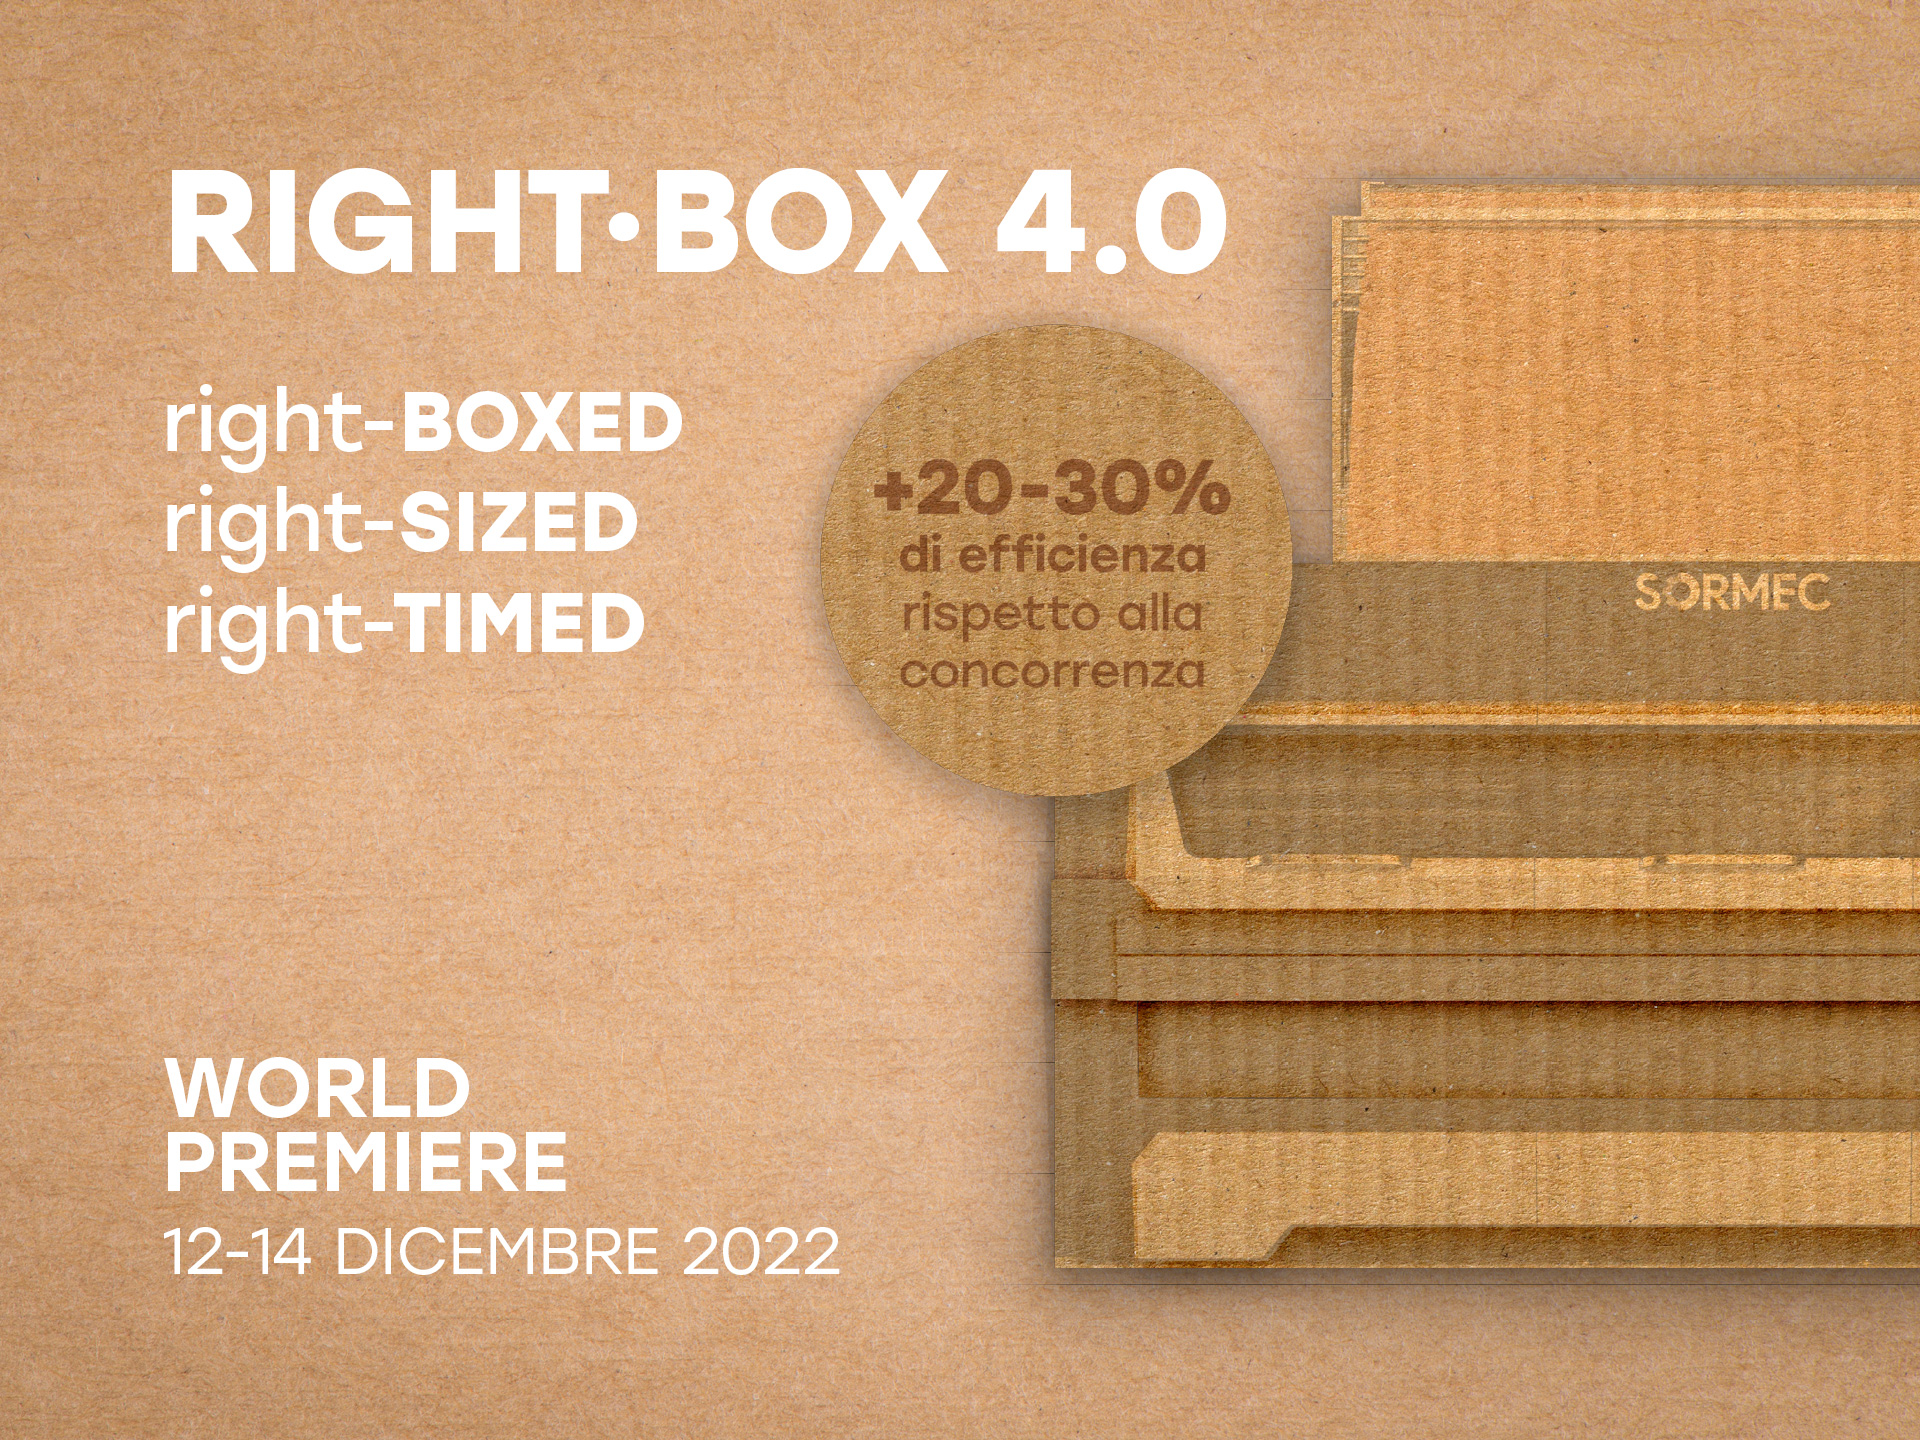 RIGHT-BOX 4.0: efficiency +20-30% compared to competitors